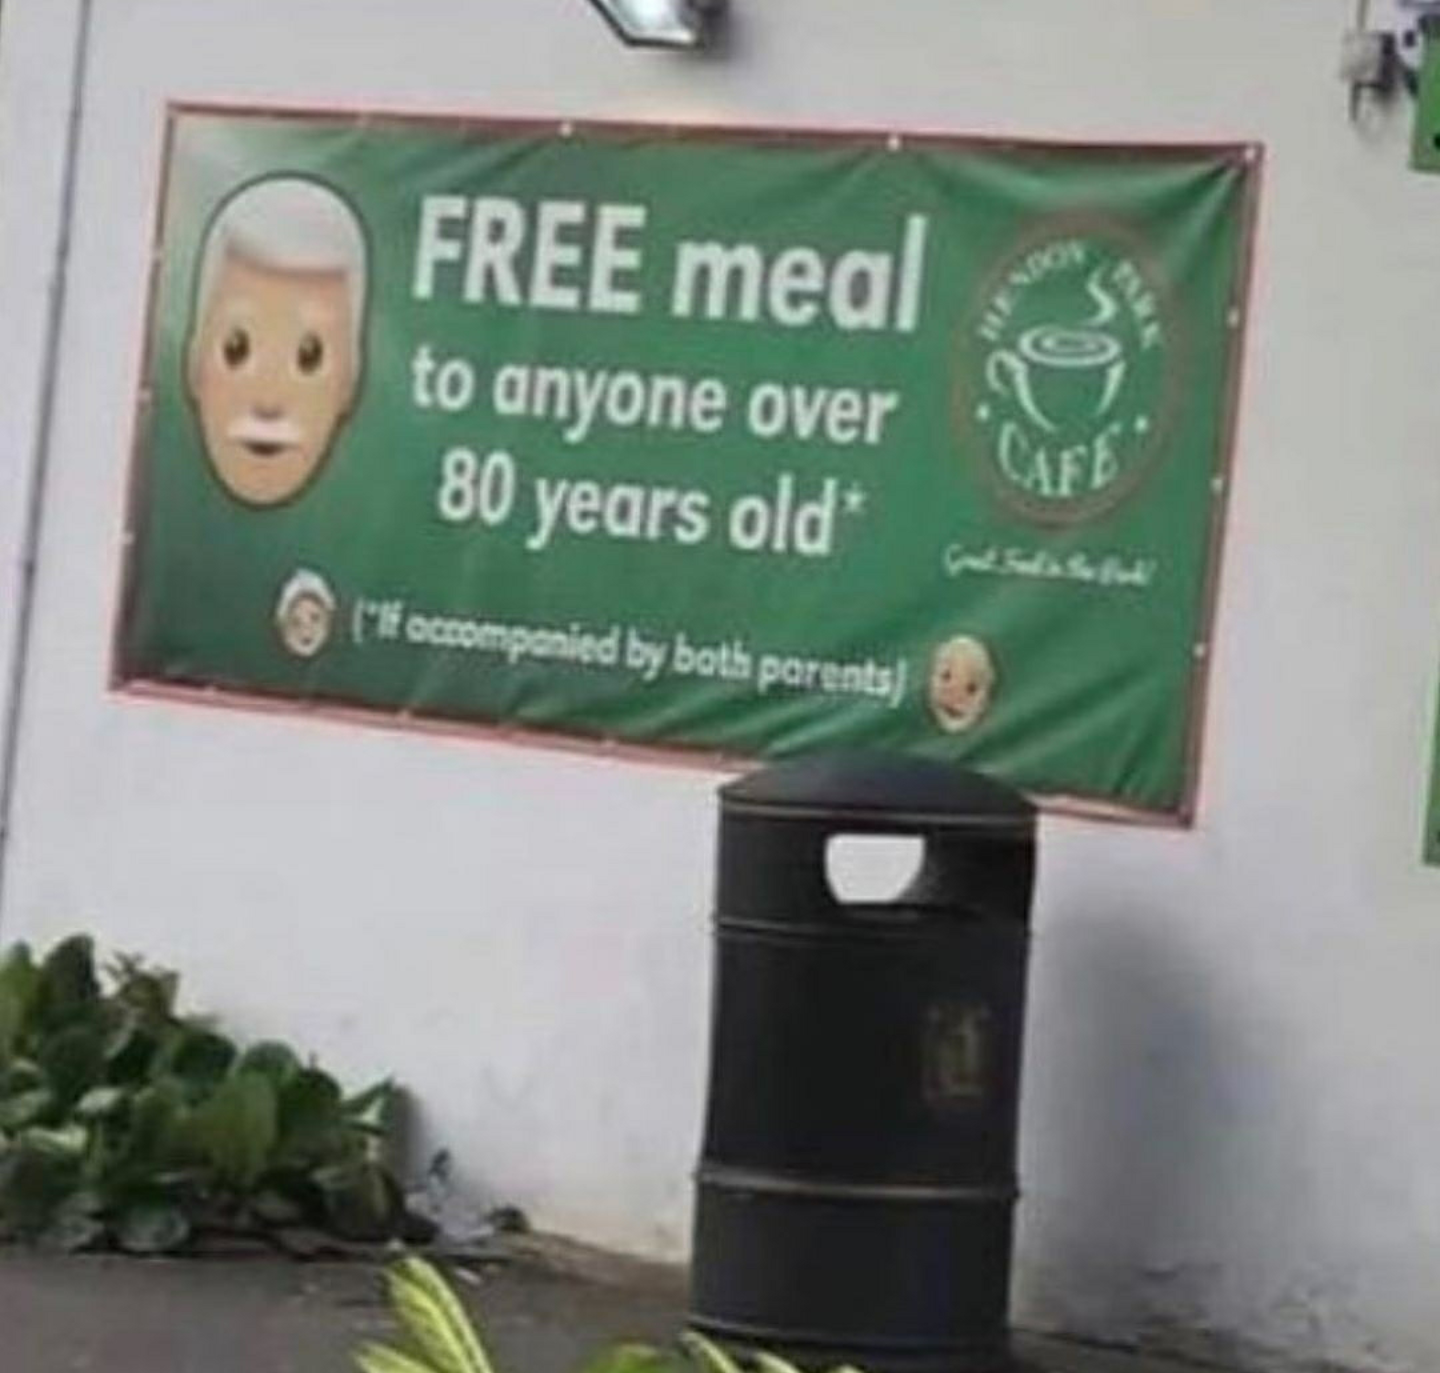 So cute they care about eldery and give them free food